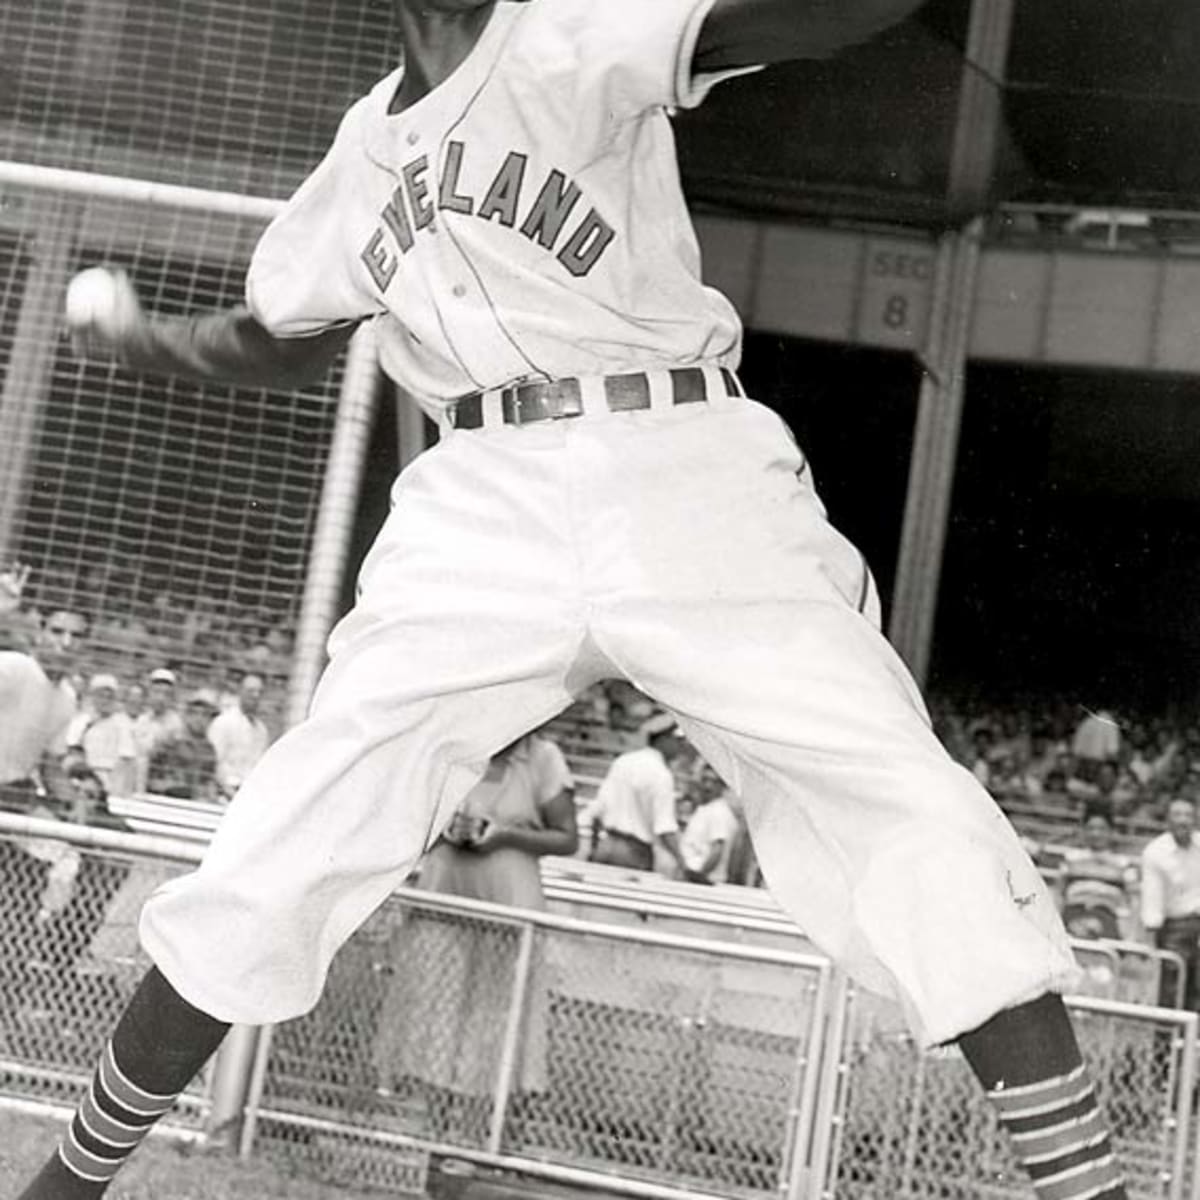 Satchel Paige was one of baseball's best pitchers long before